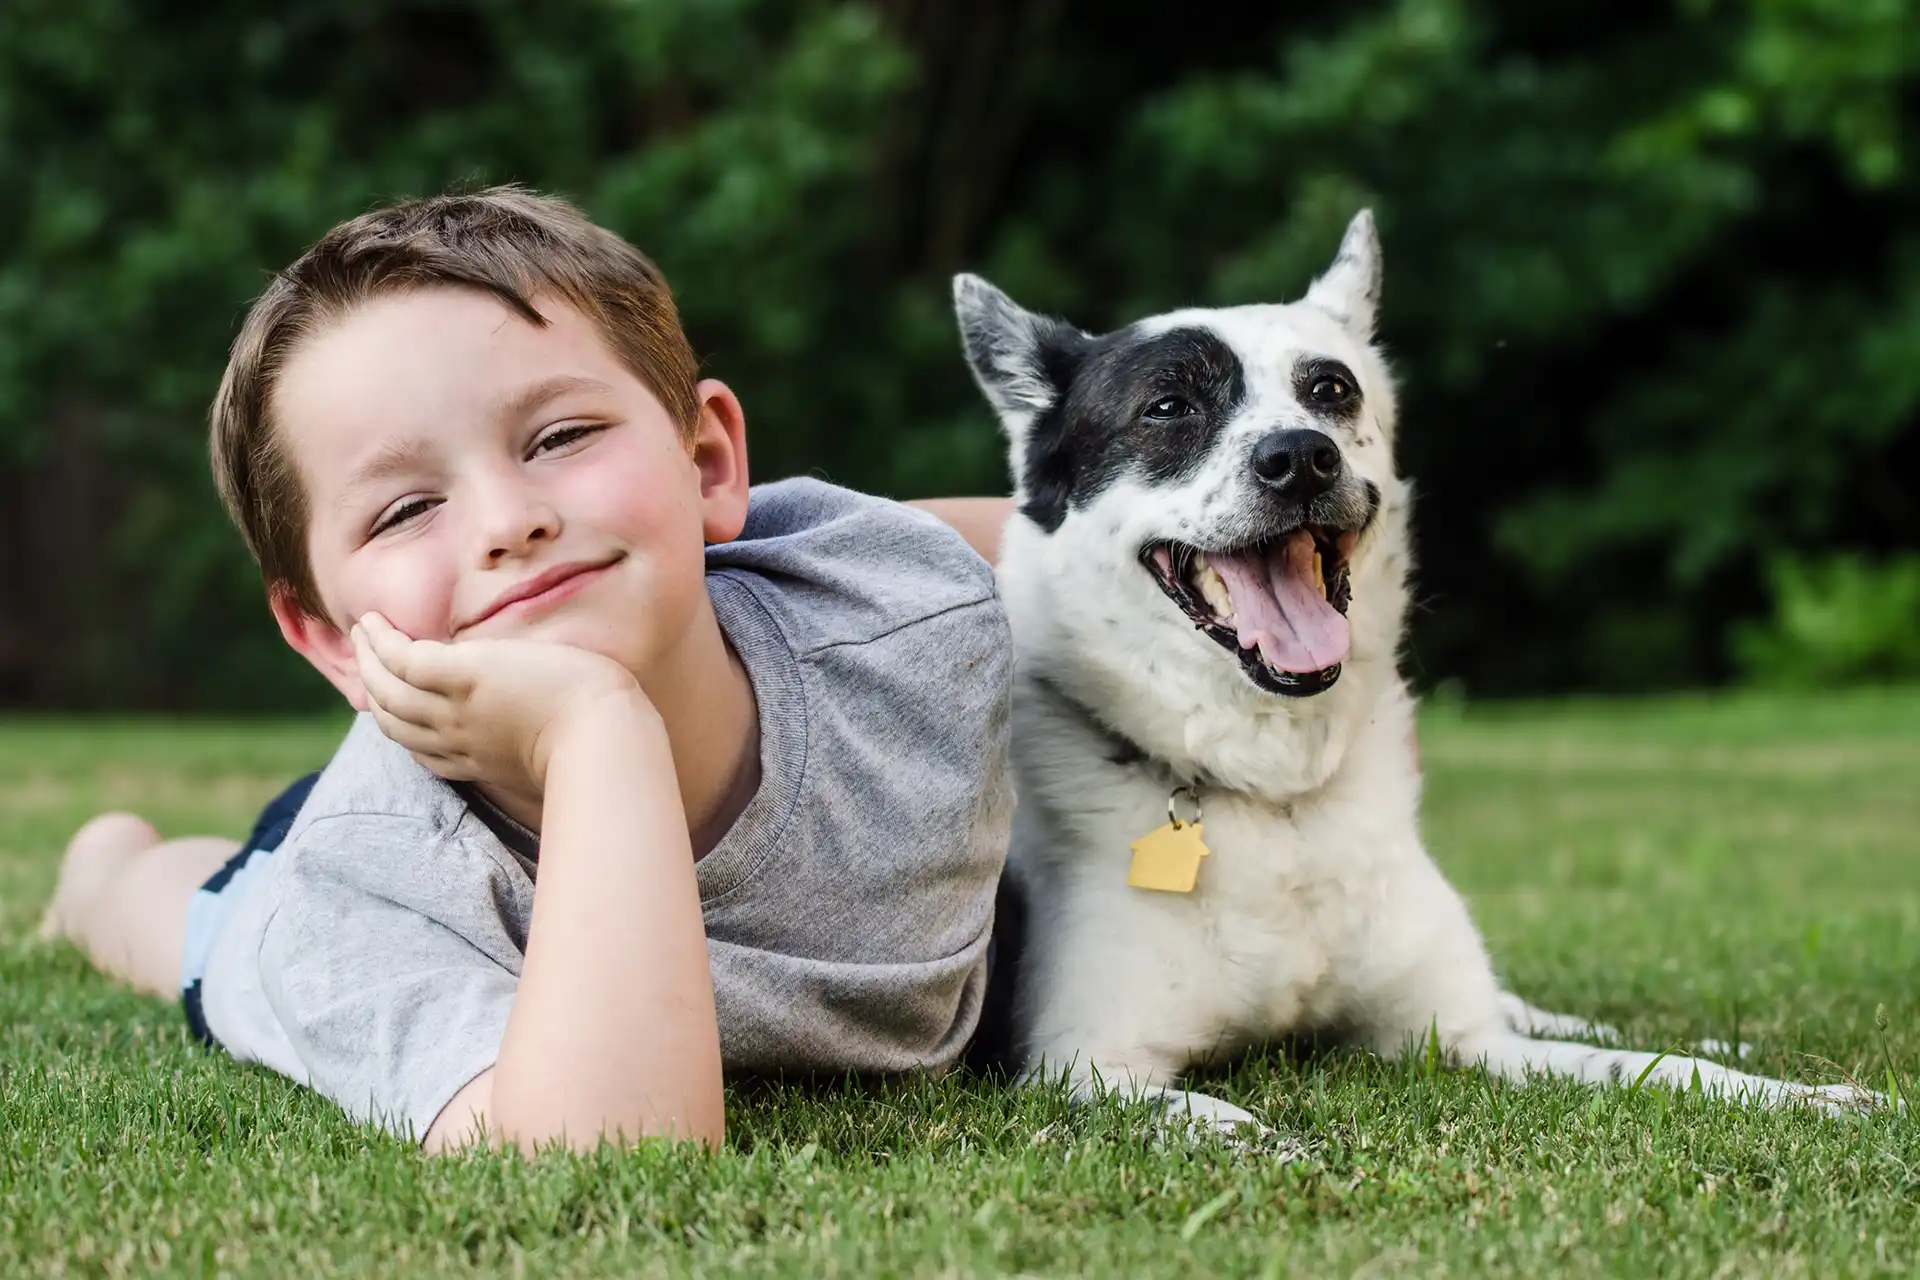 hypnosis, hypnotherapy for children, health A young boy peacefully laying on the grass with his loyal dog, experiencing the calming benefits of hypnotherapy for children.